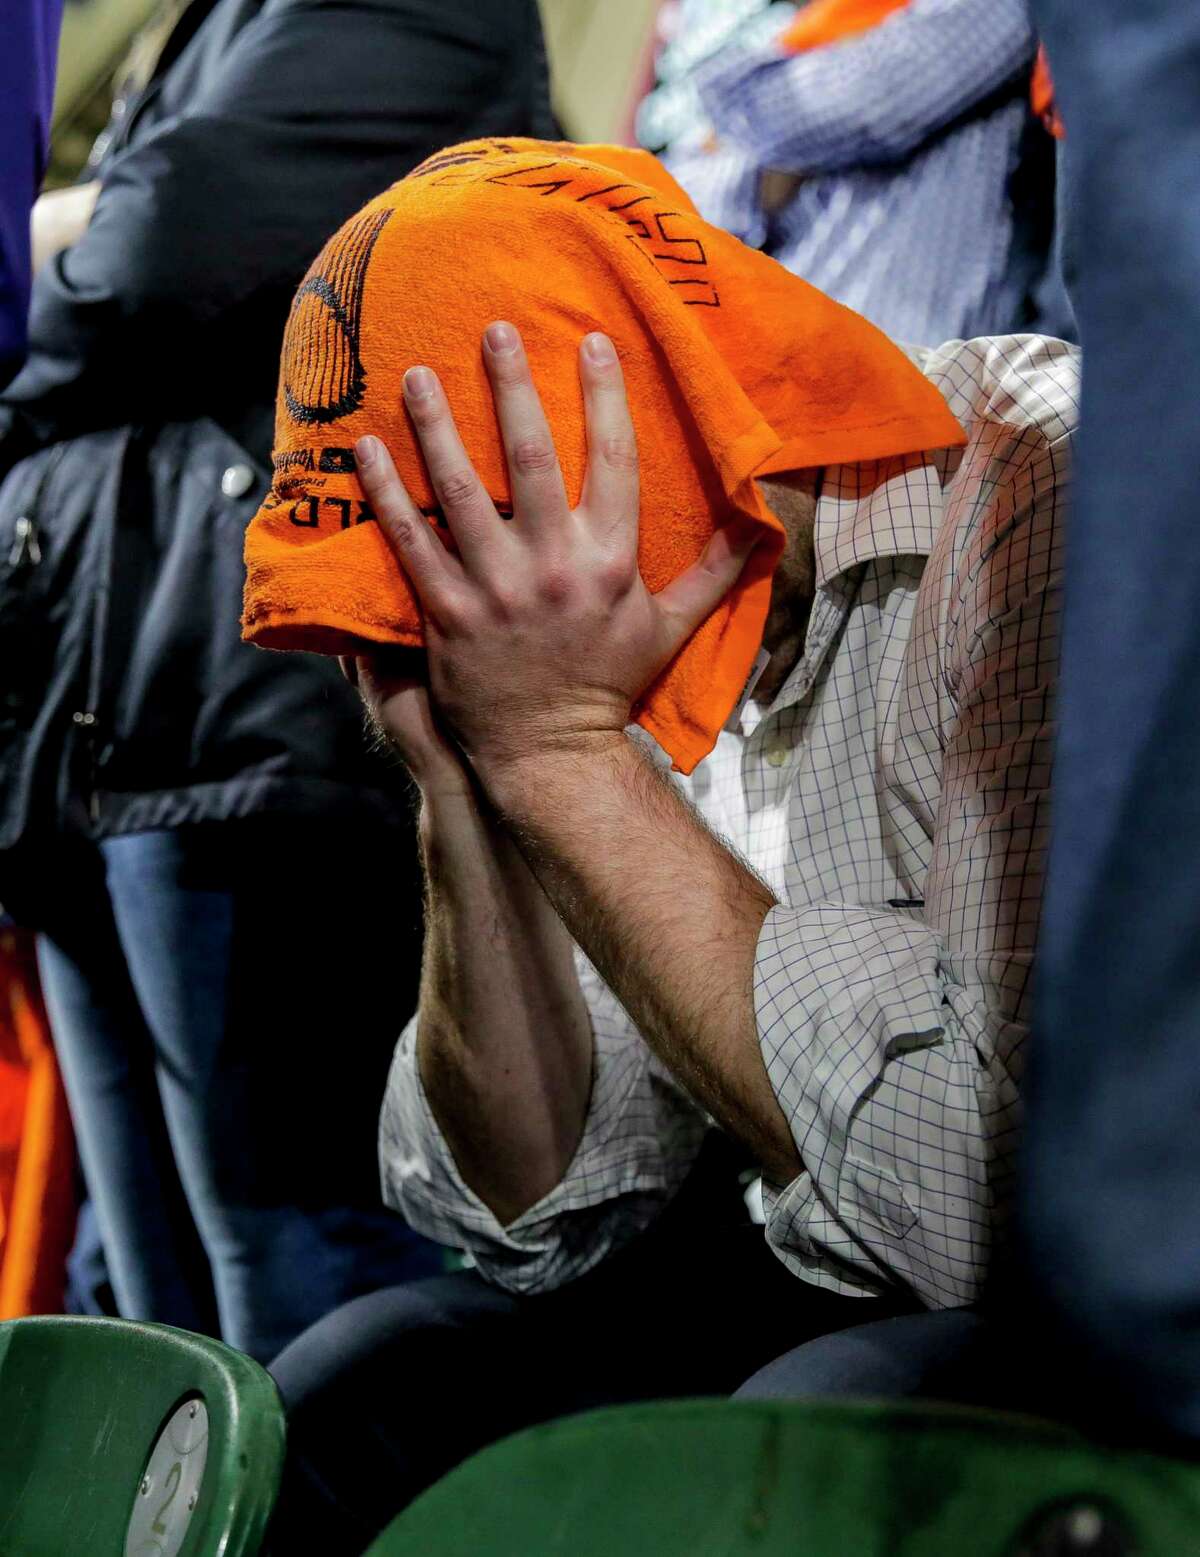 An Astros fan shows disappointment the final moments of Game 7 on Oct. 30, but the teams’ fan are feeling much greater despair now with an MLB investigation.